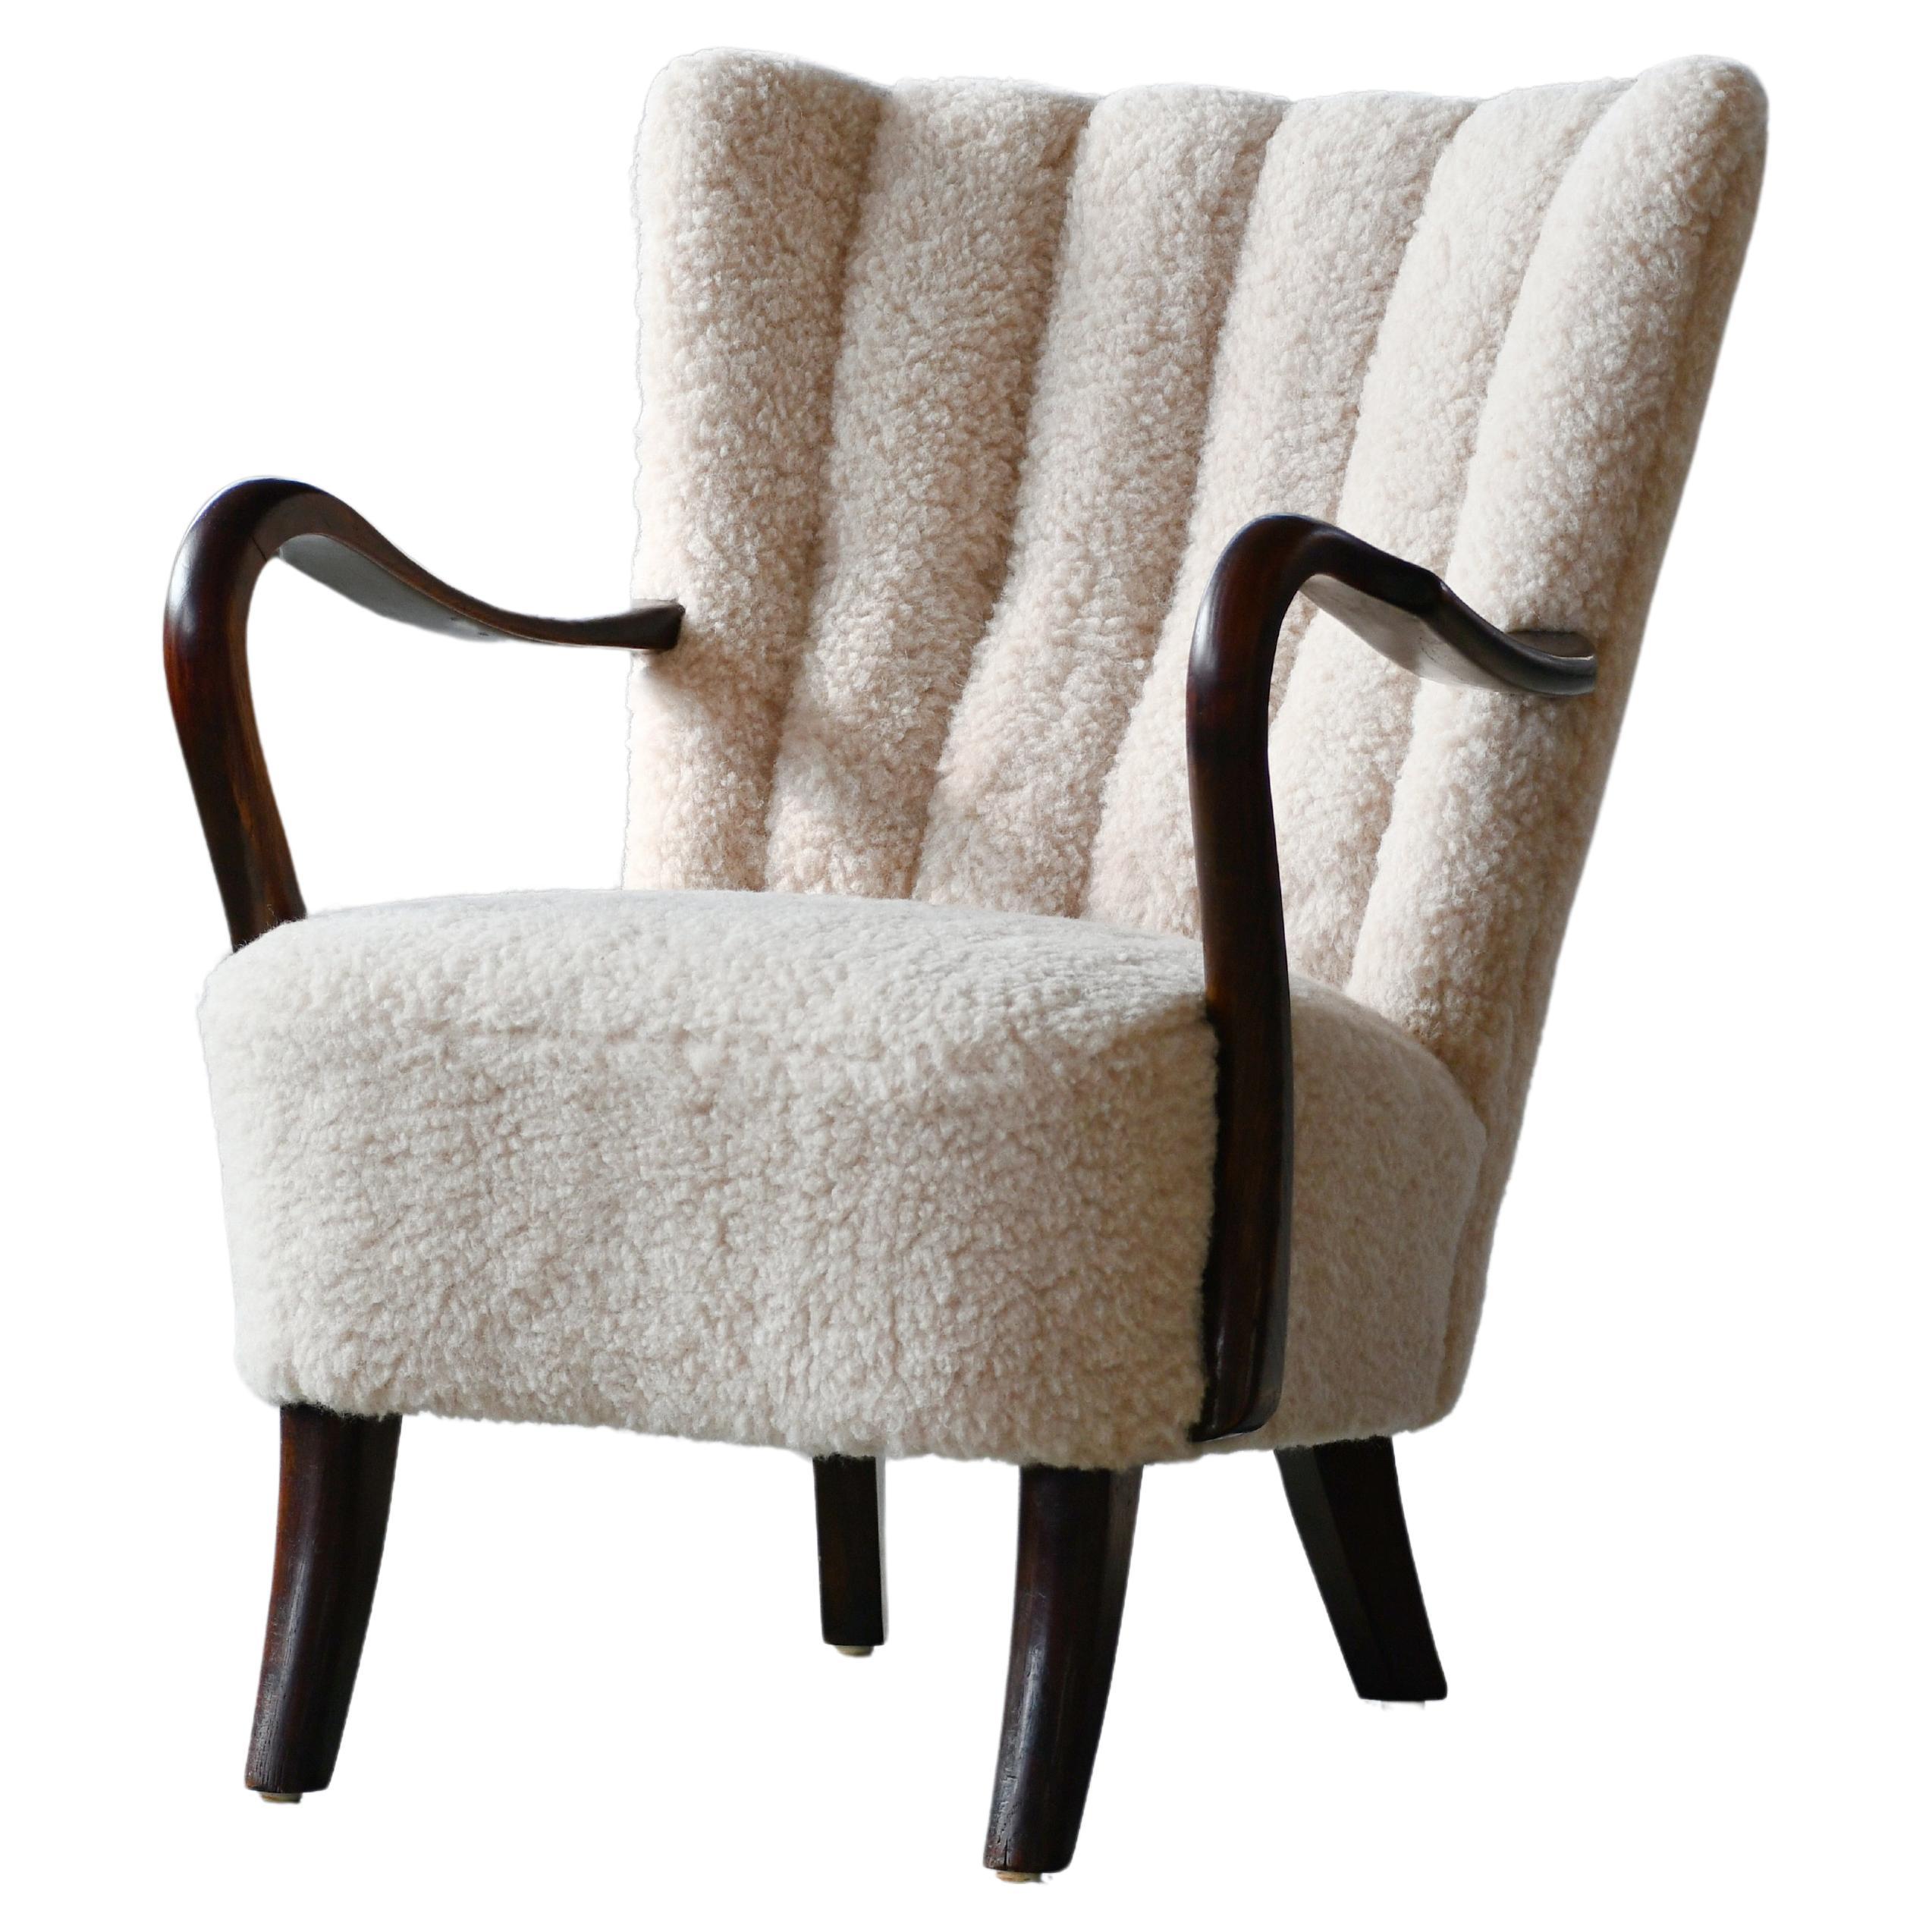 Danish 1940s Easy Chair in Lambswool with Open Armrests and Channel Back